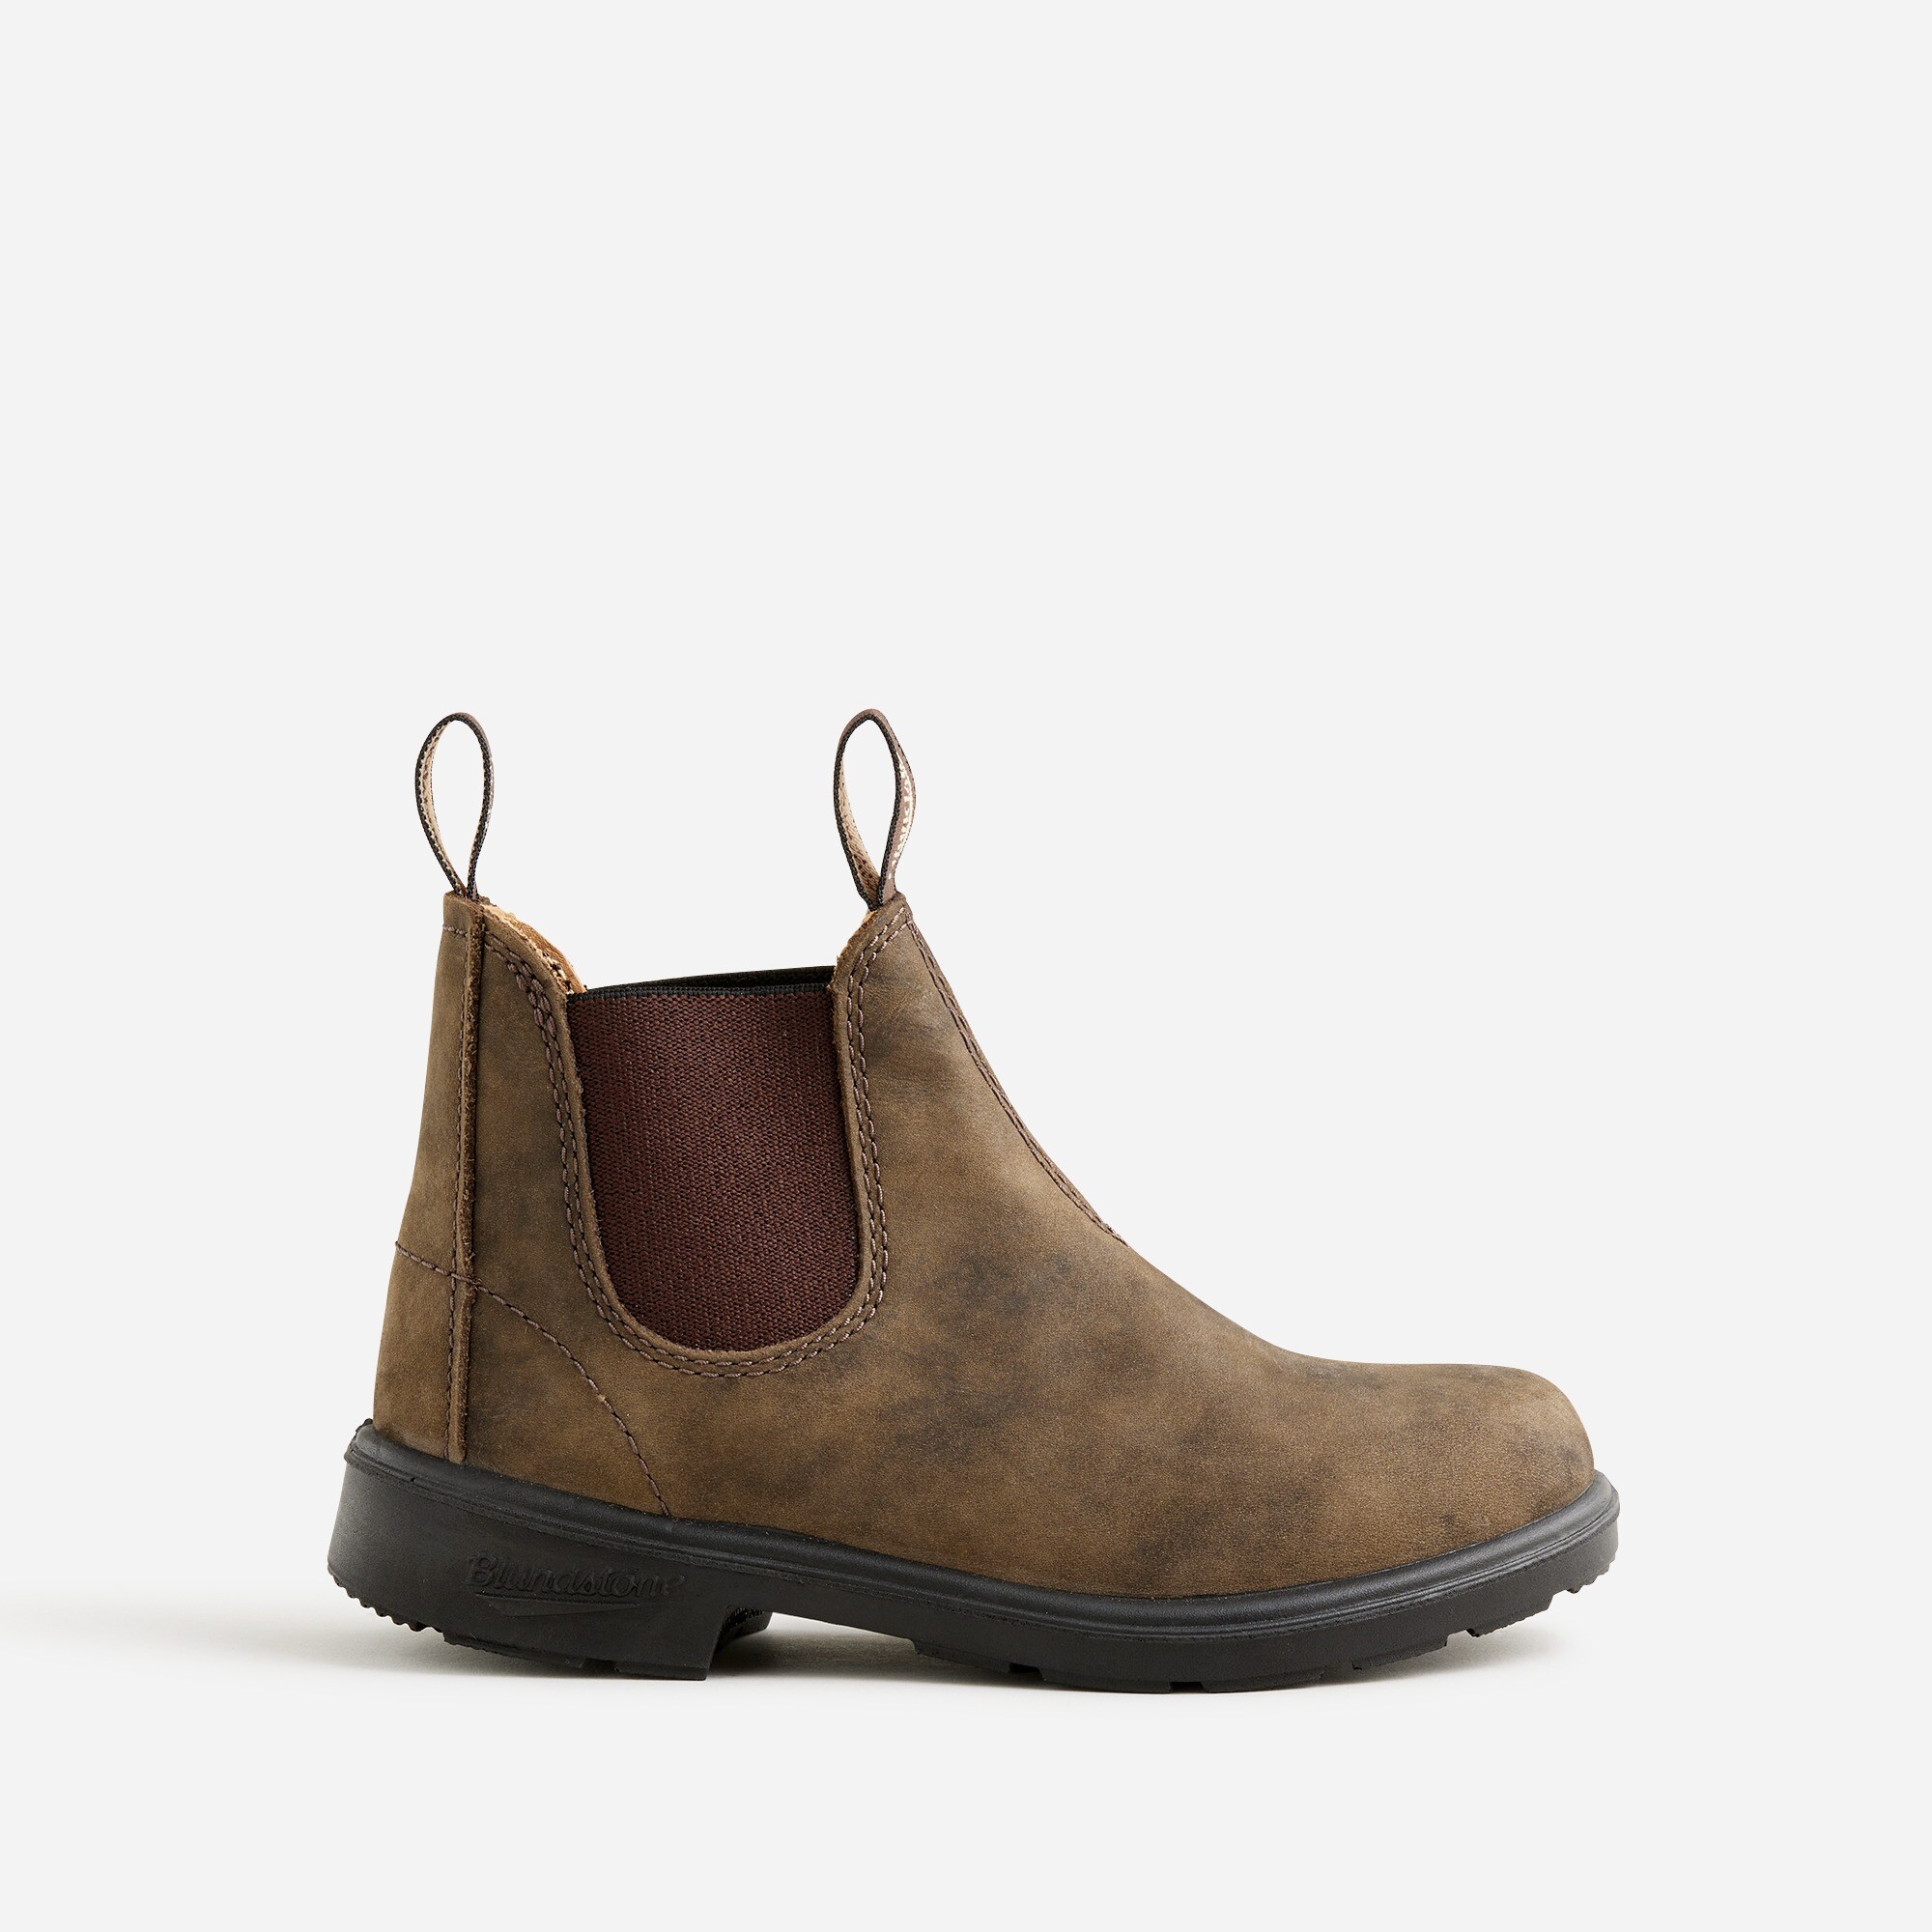 boys Kids' Blundstone&reg; boots in oiled leather